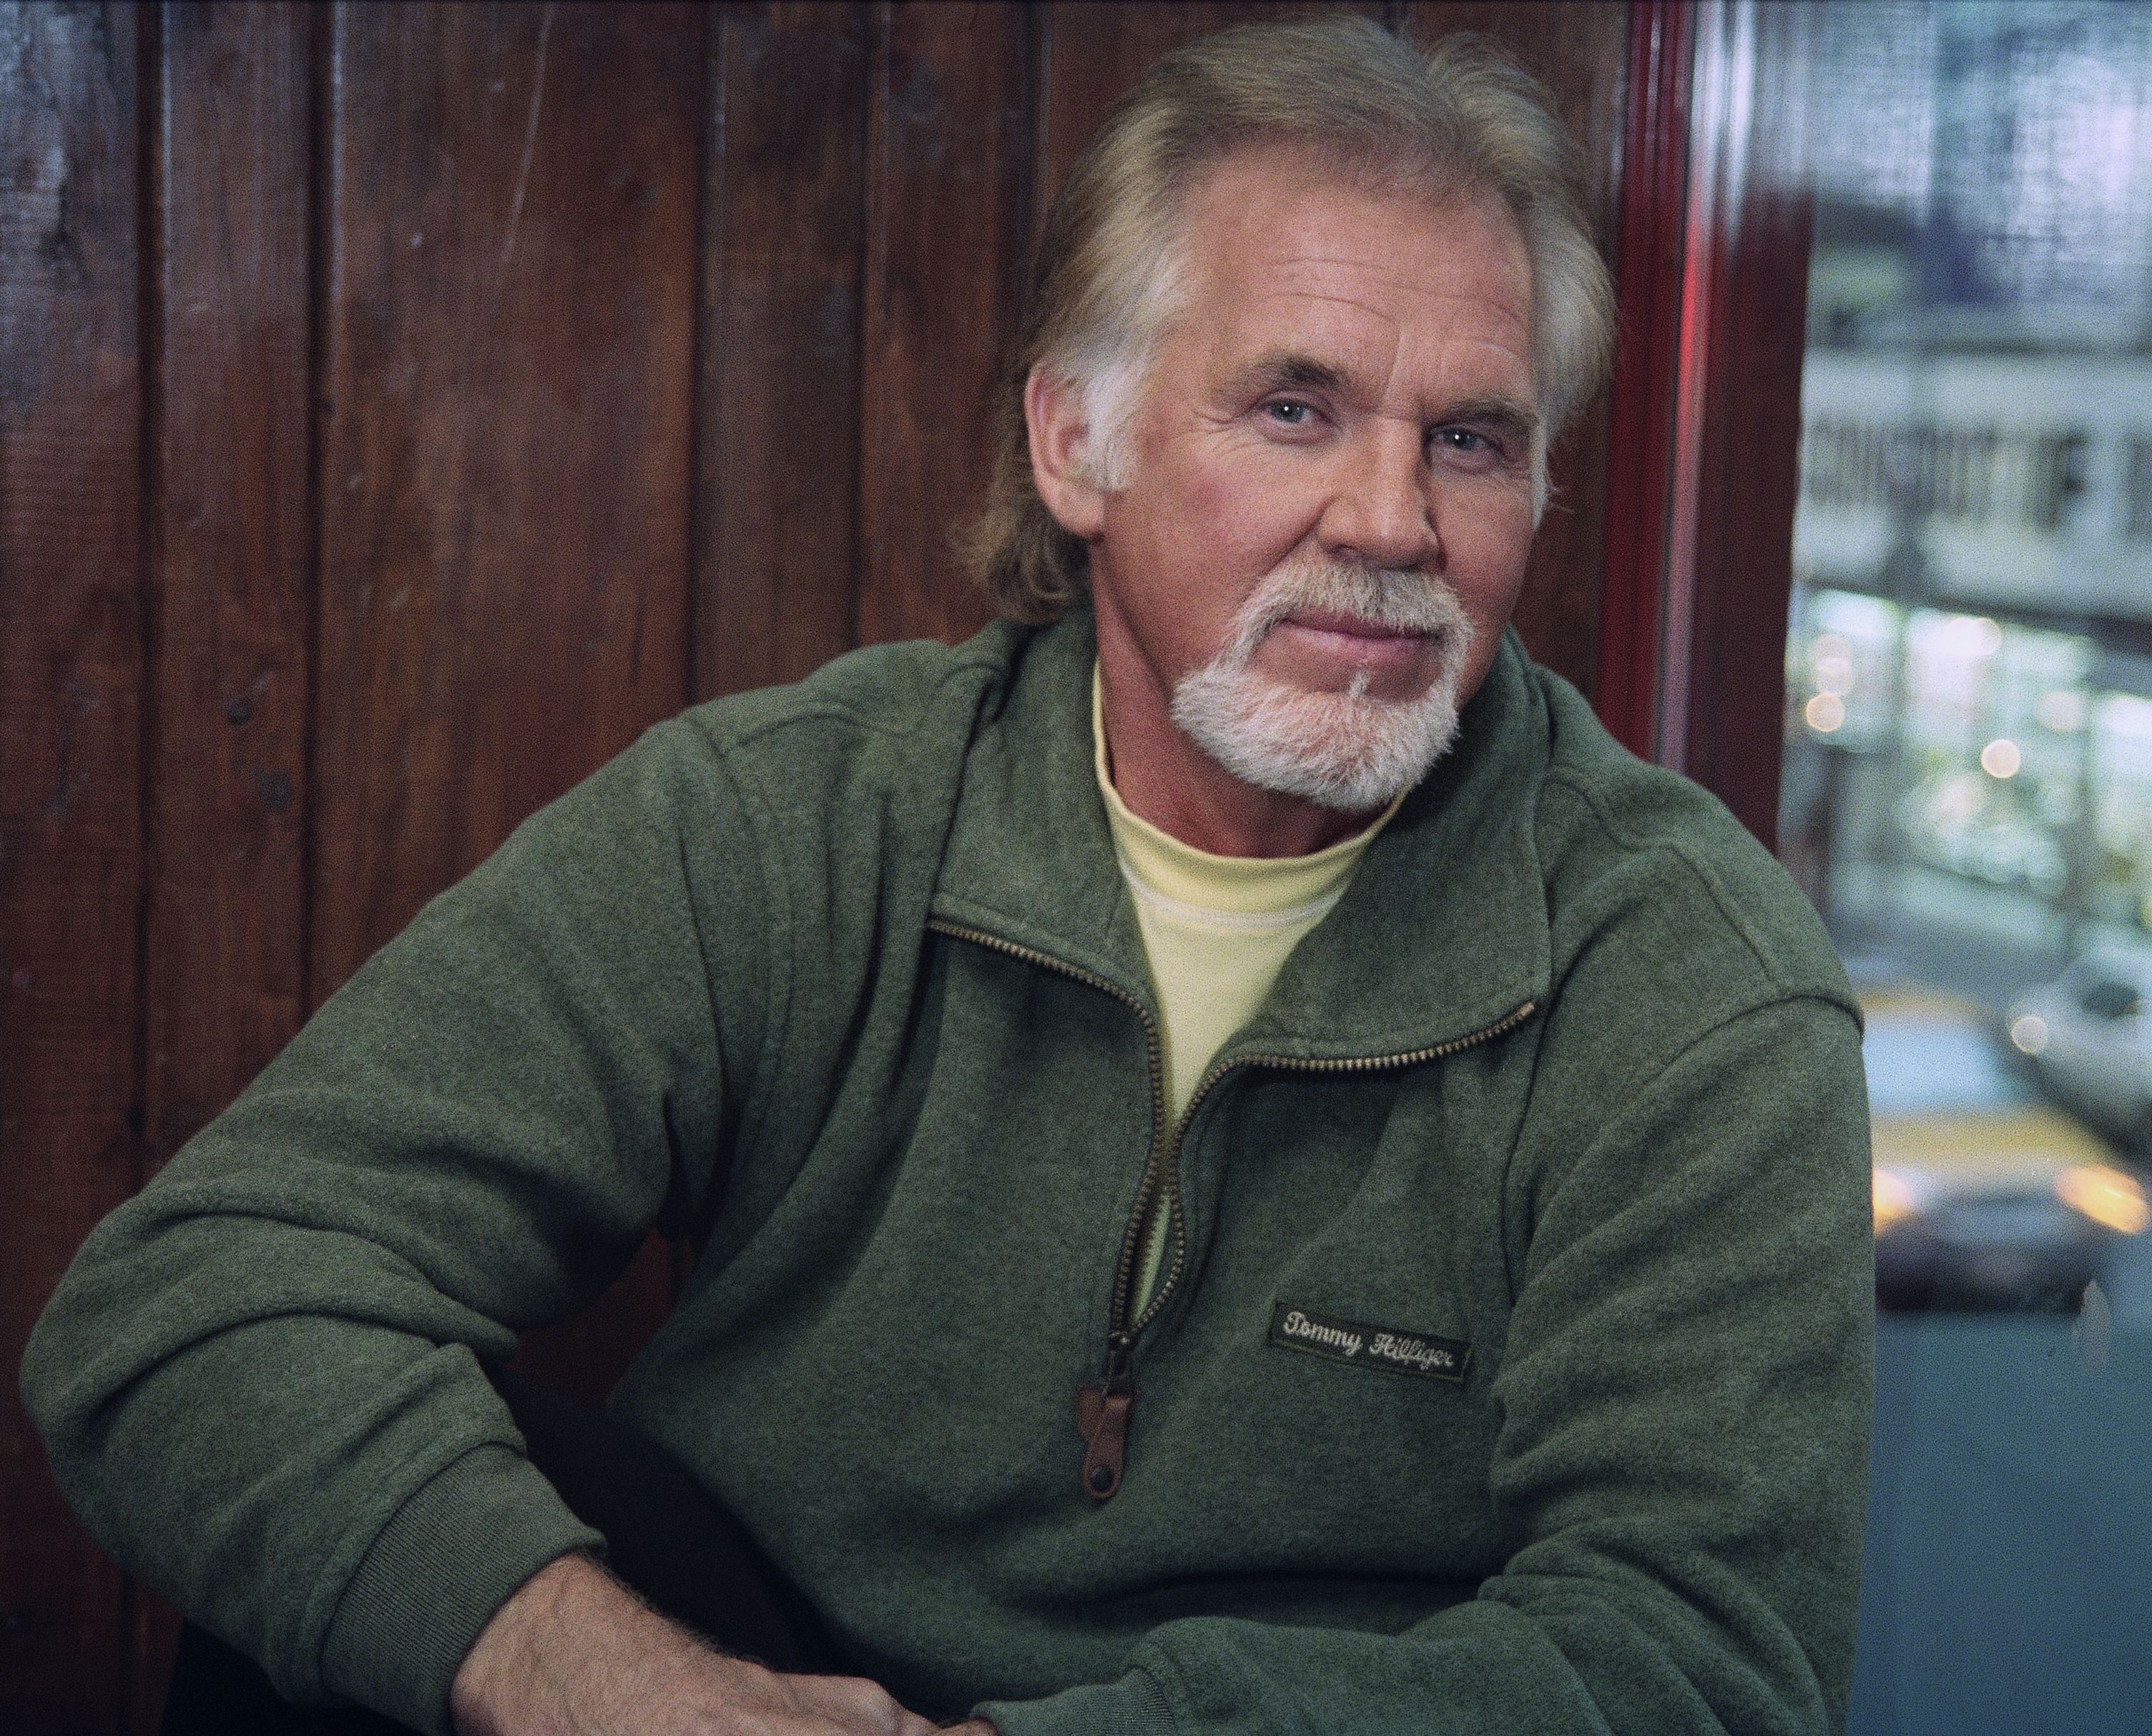 kenny rogers through the years strong